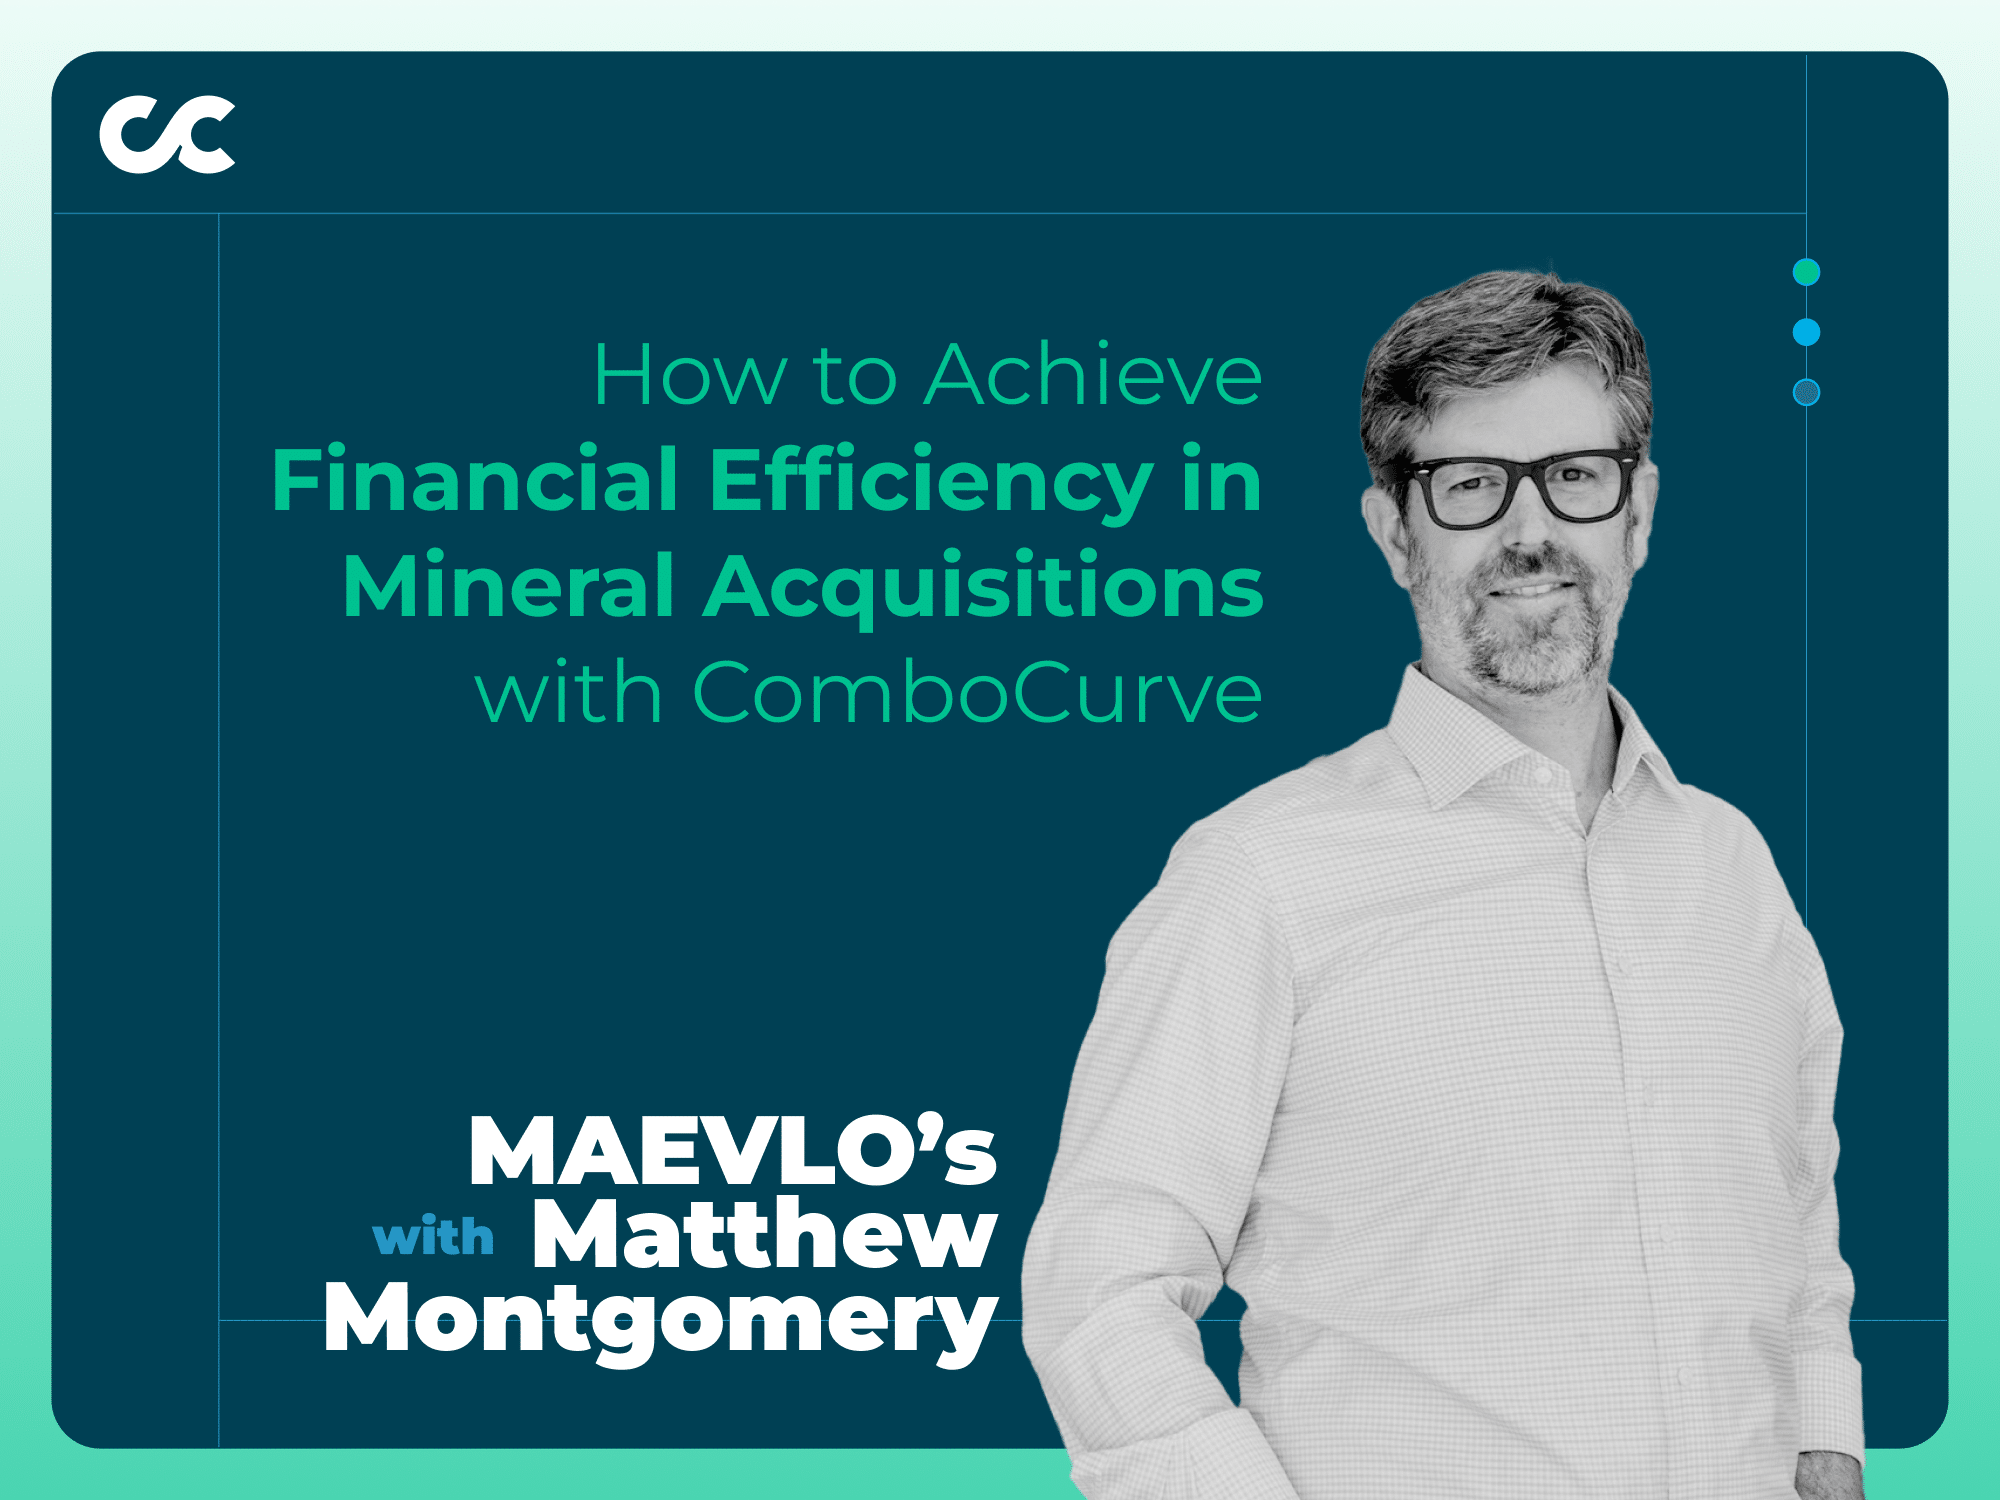 Financial Efficiency in Mineral Acquisitions with ComboCurve